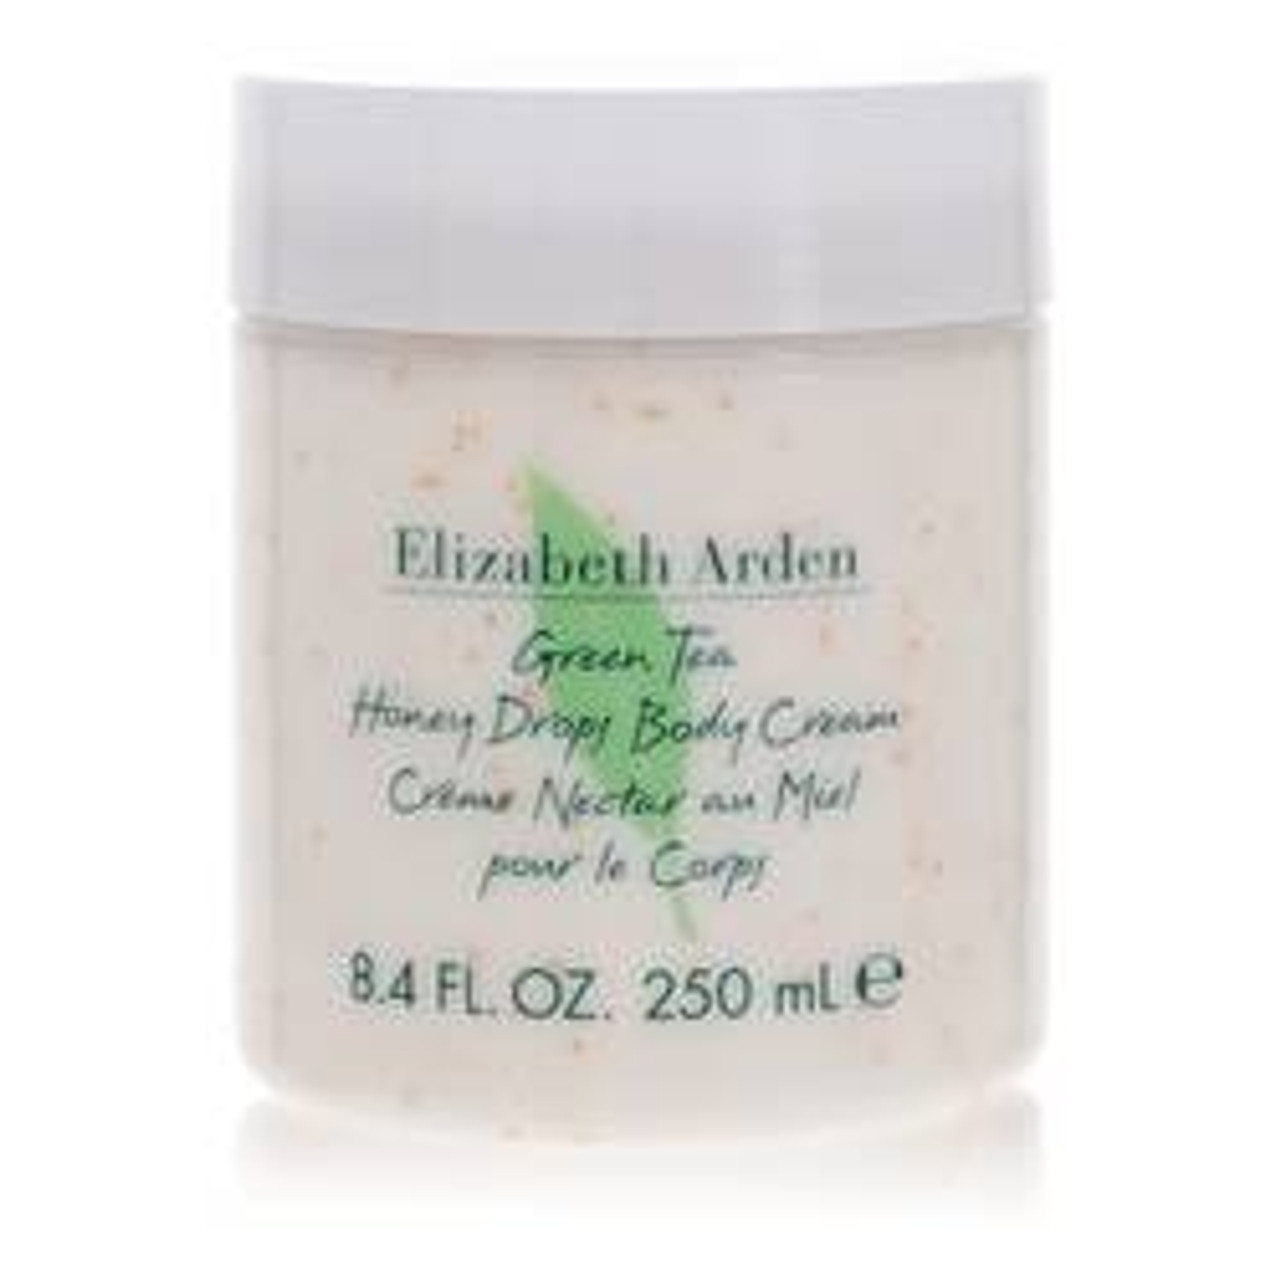 Green Tea Perfume By Elizabeth Arden Honey Drops Body Cream 8.4 oz for Women - [From 63.00 - Choose pk Qty ] - *Ships from Miami